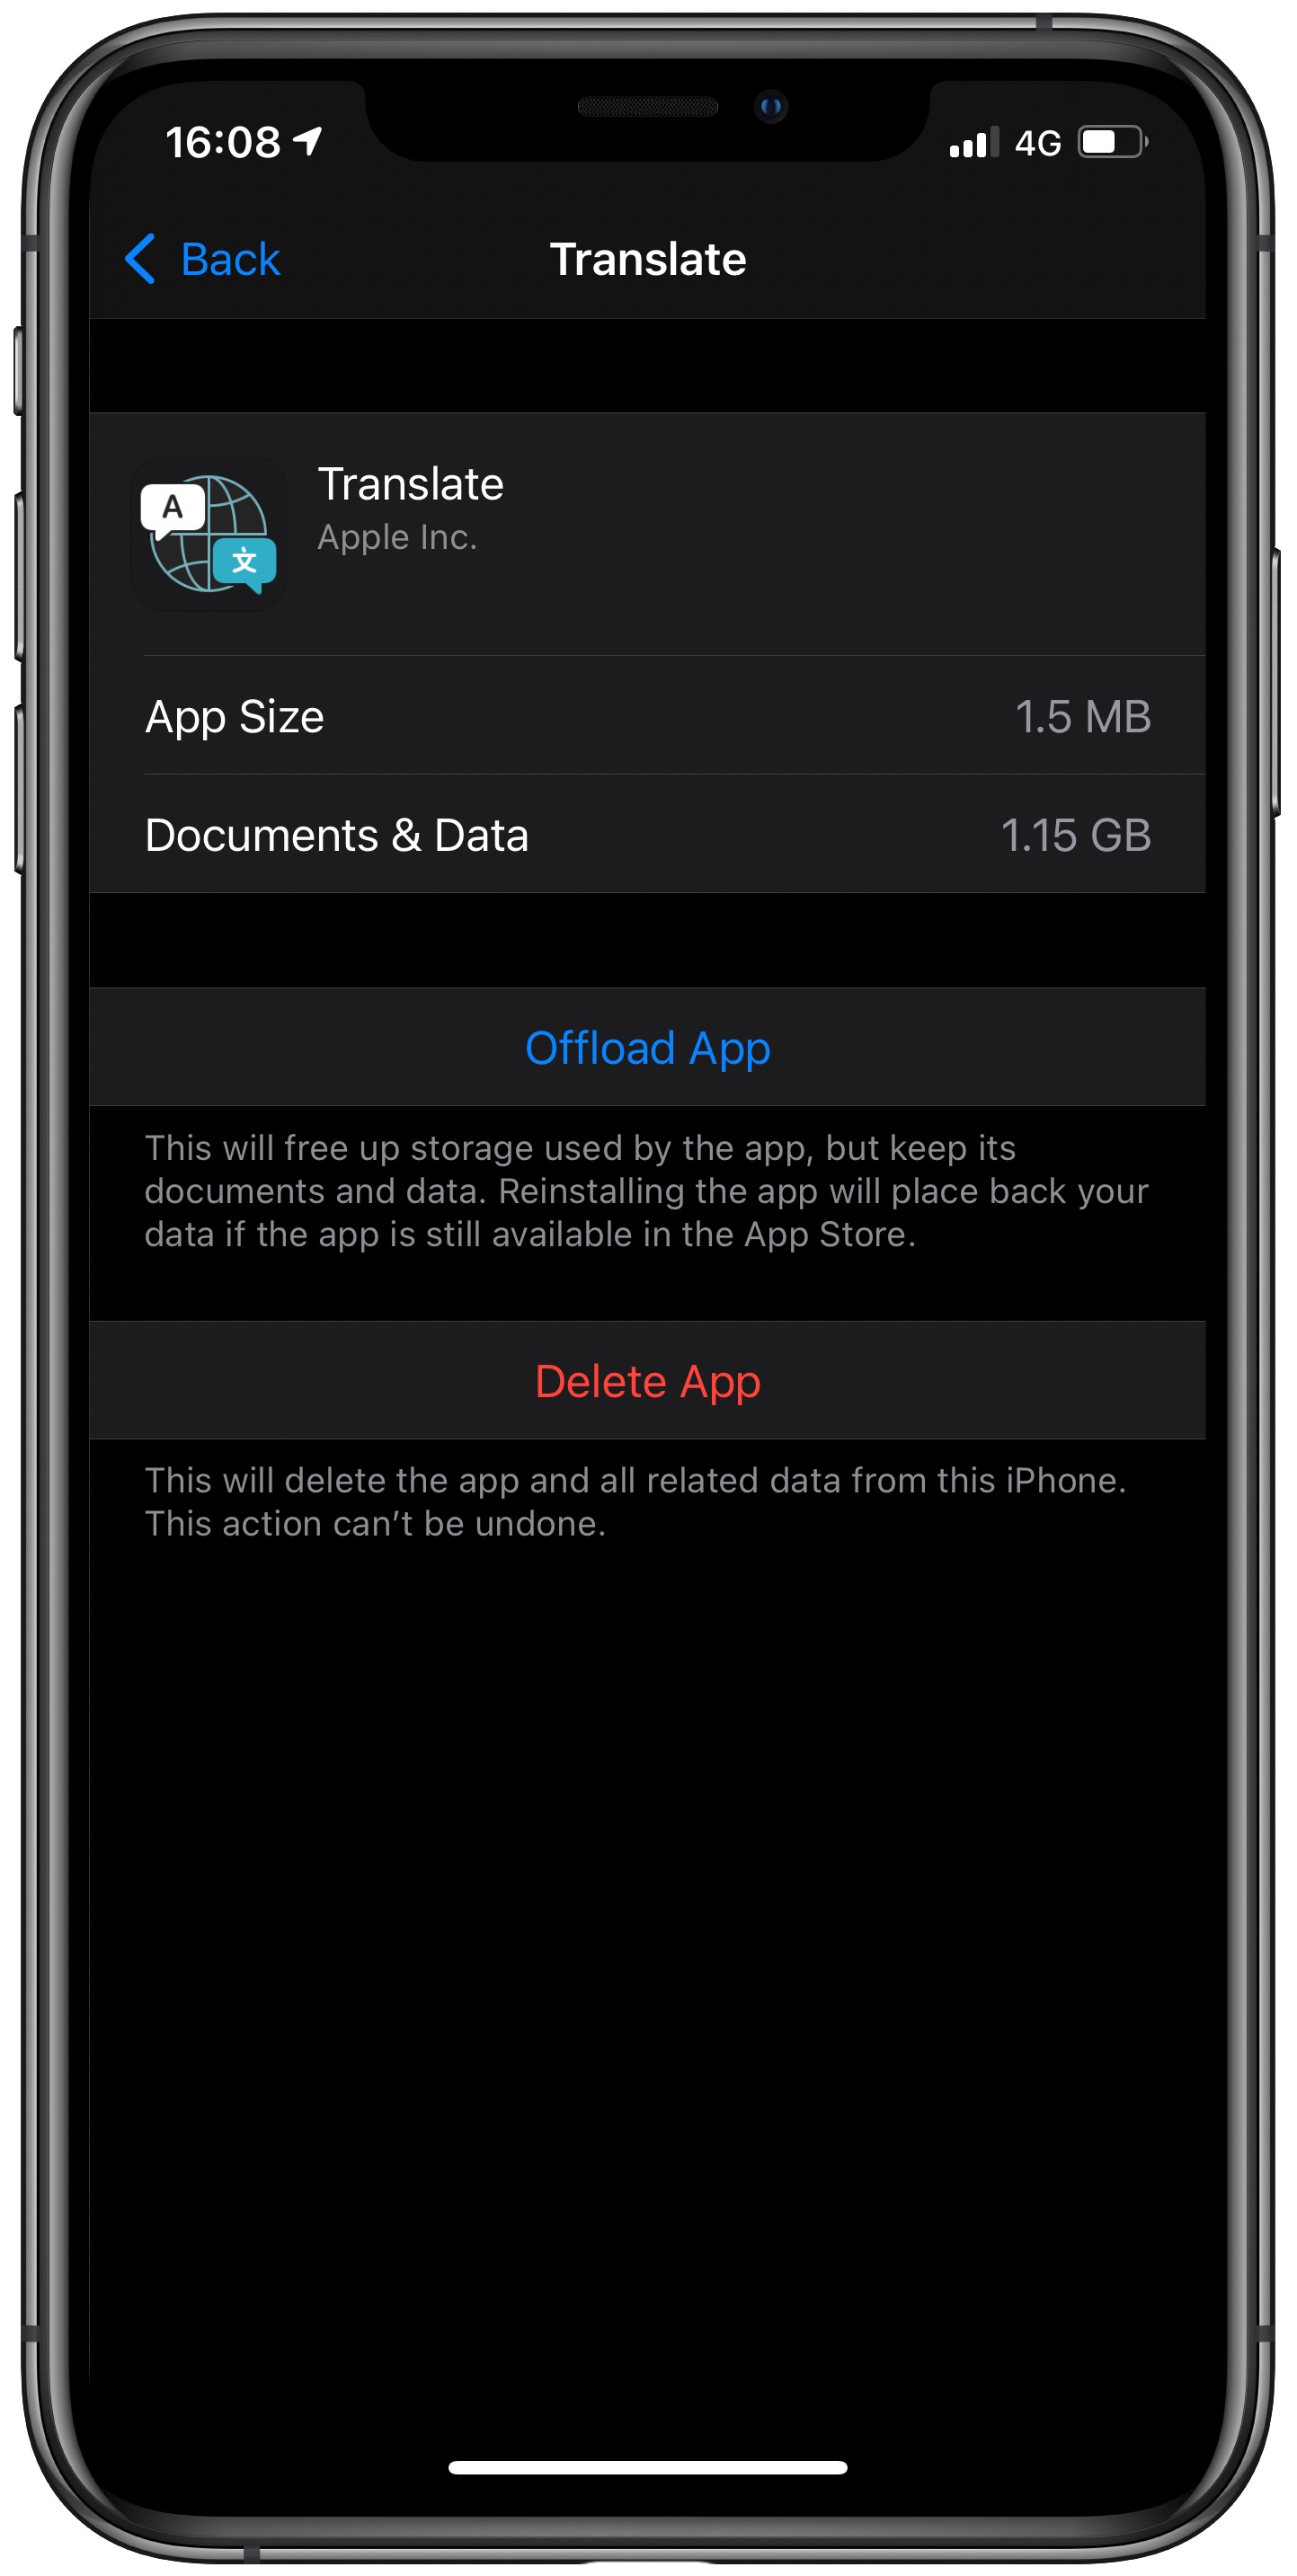 iPhone storage section - Translate app details